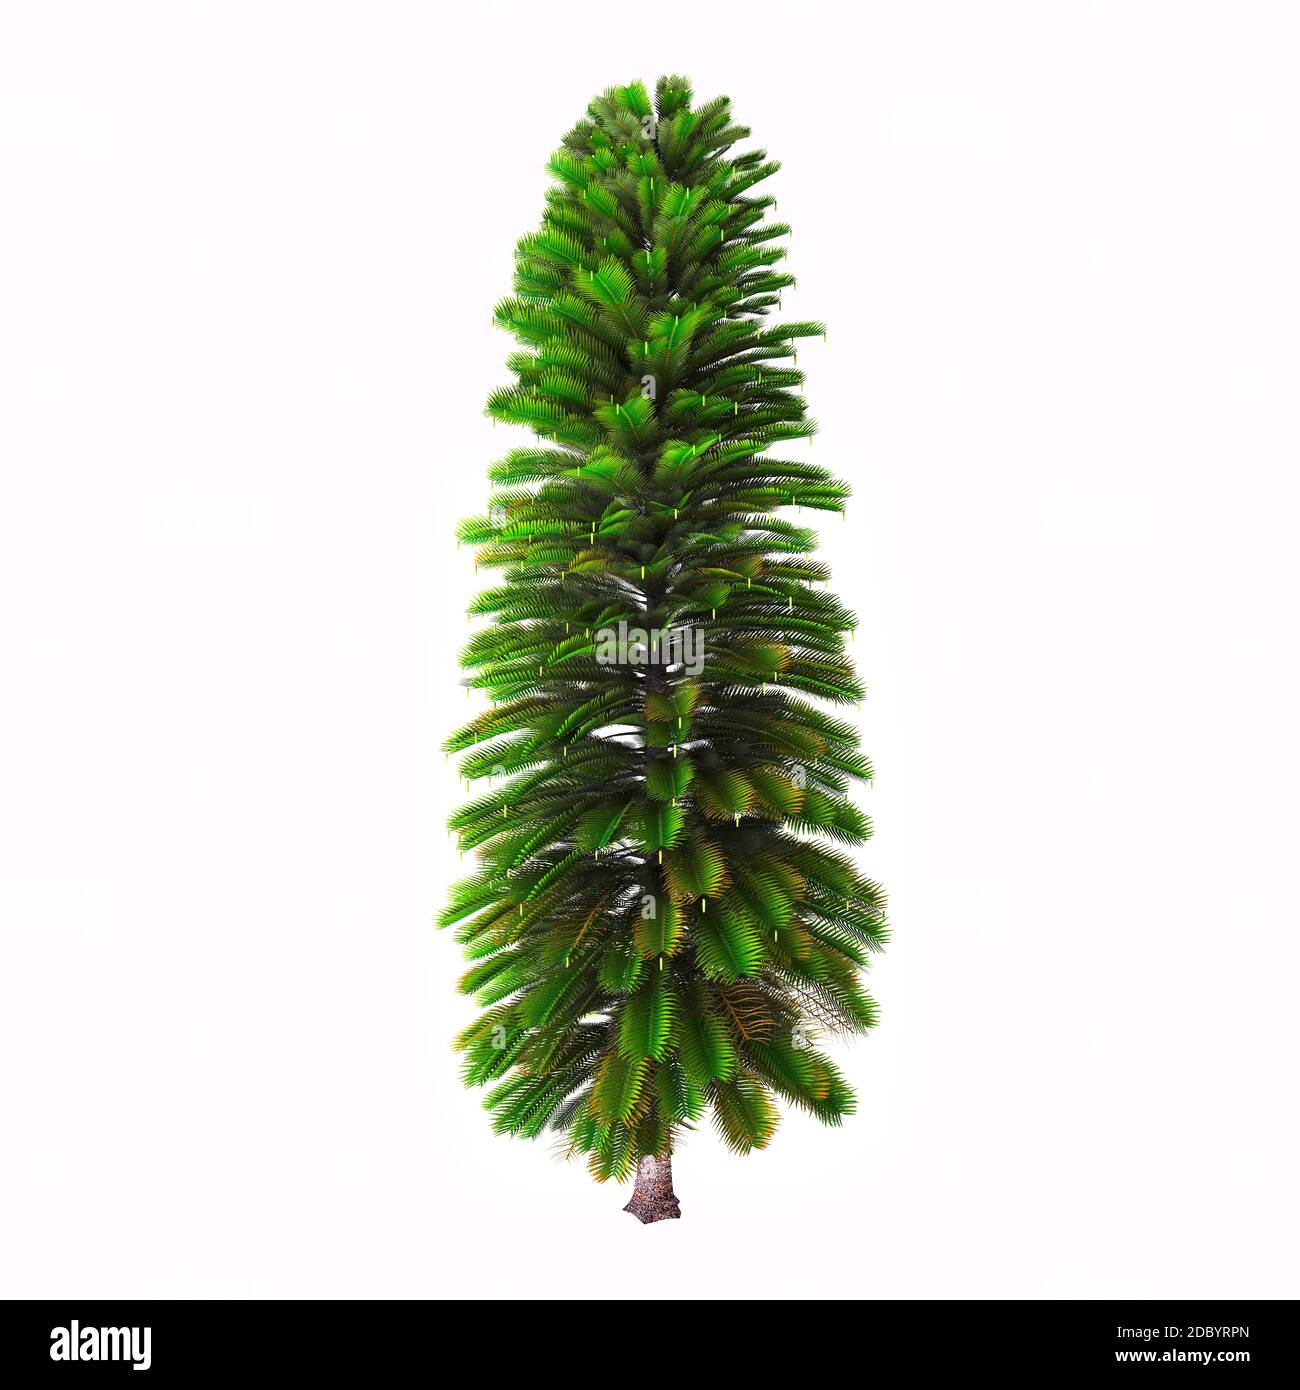 Wollemia is a genus of coniferous tree in the family Araucariaceae. Wollemia was only known through fossil records until the Australian species Wollem Stock Photo